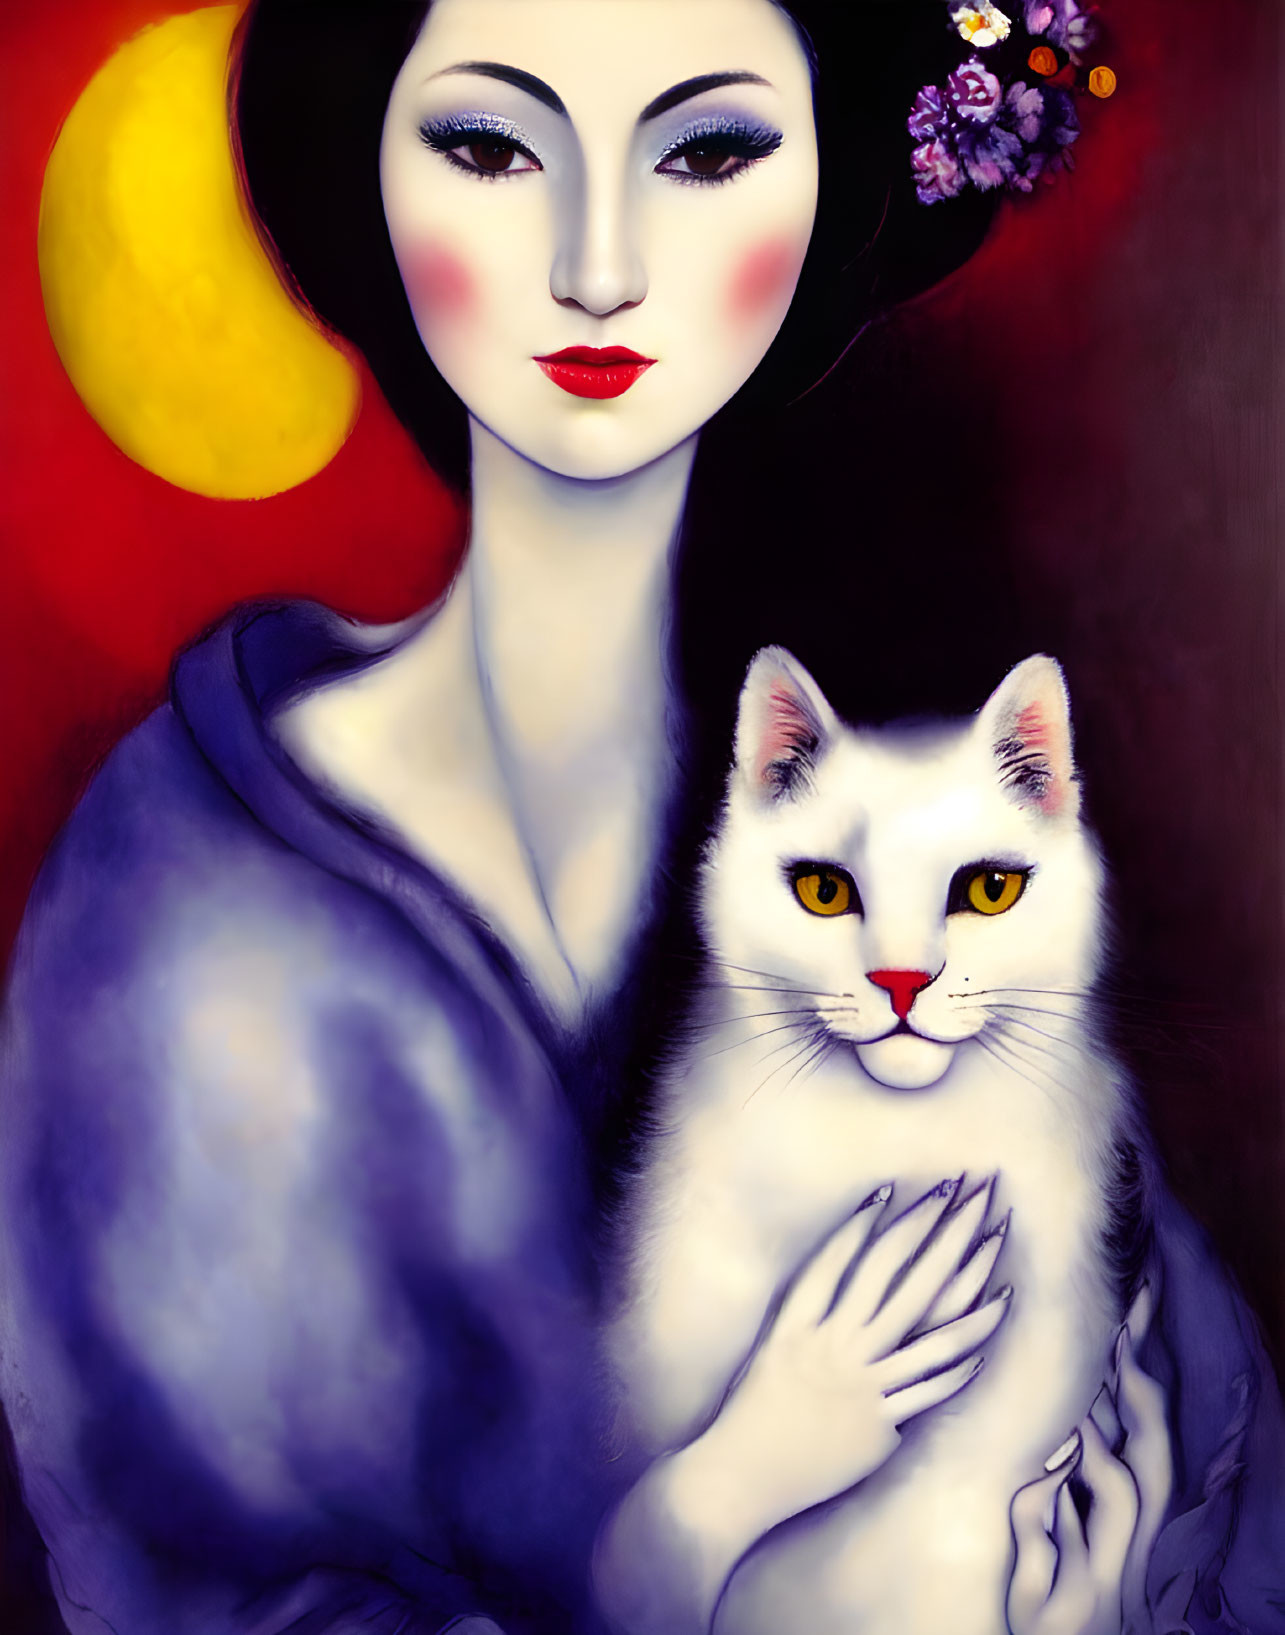 Stylized painting of pale woman with red lips and cat on red-yellow background